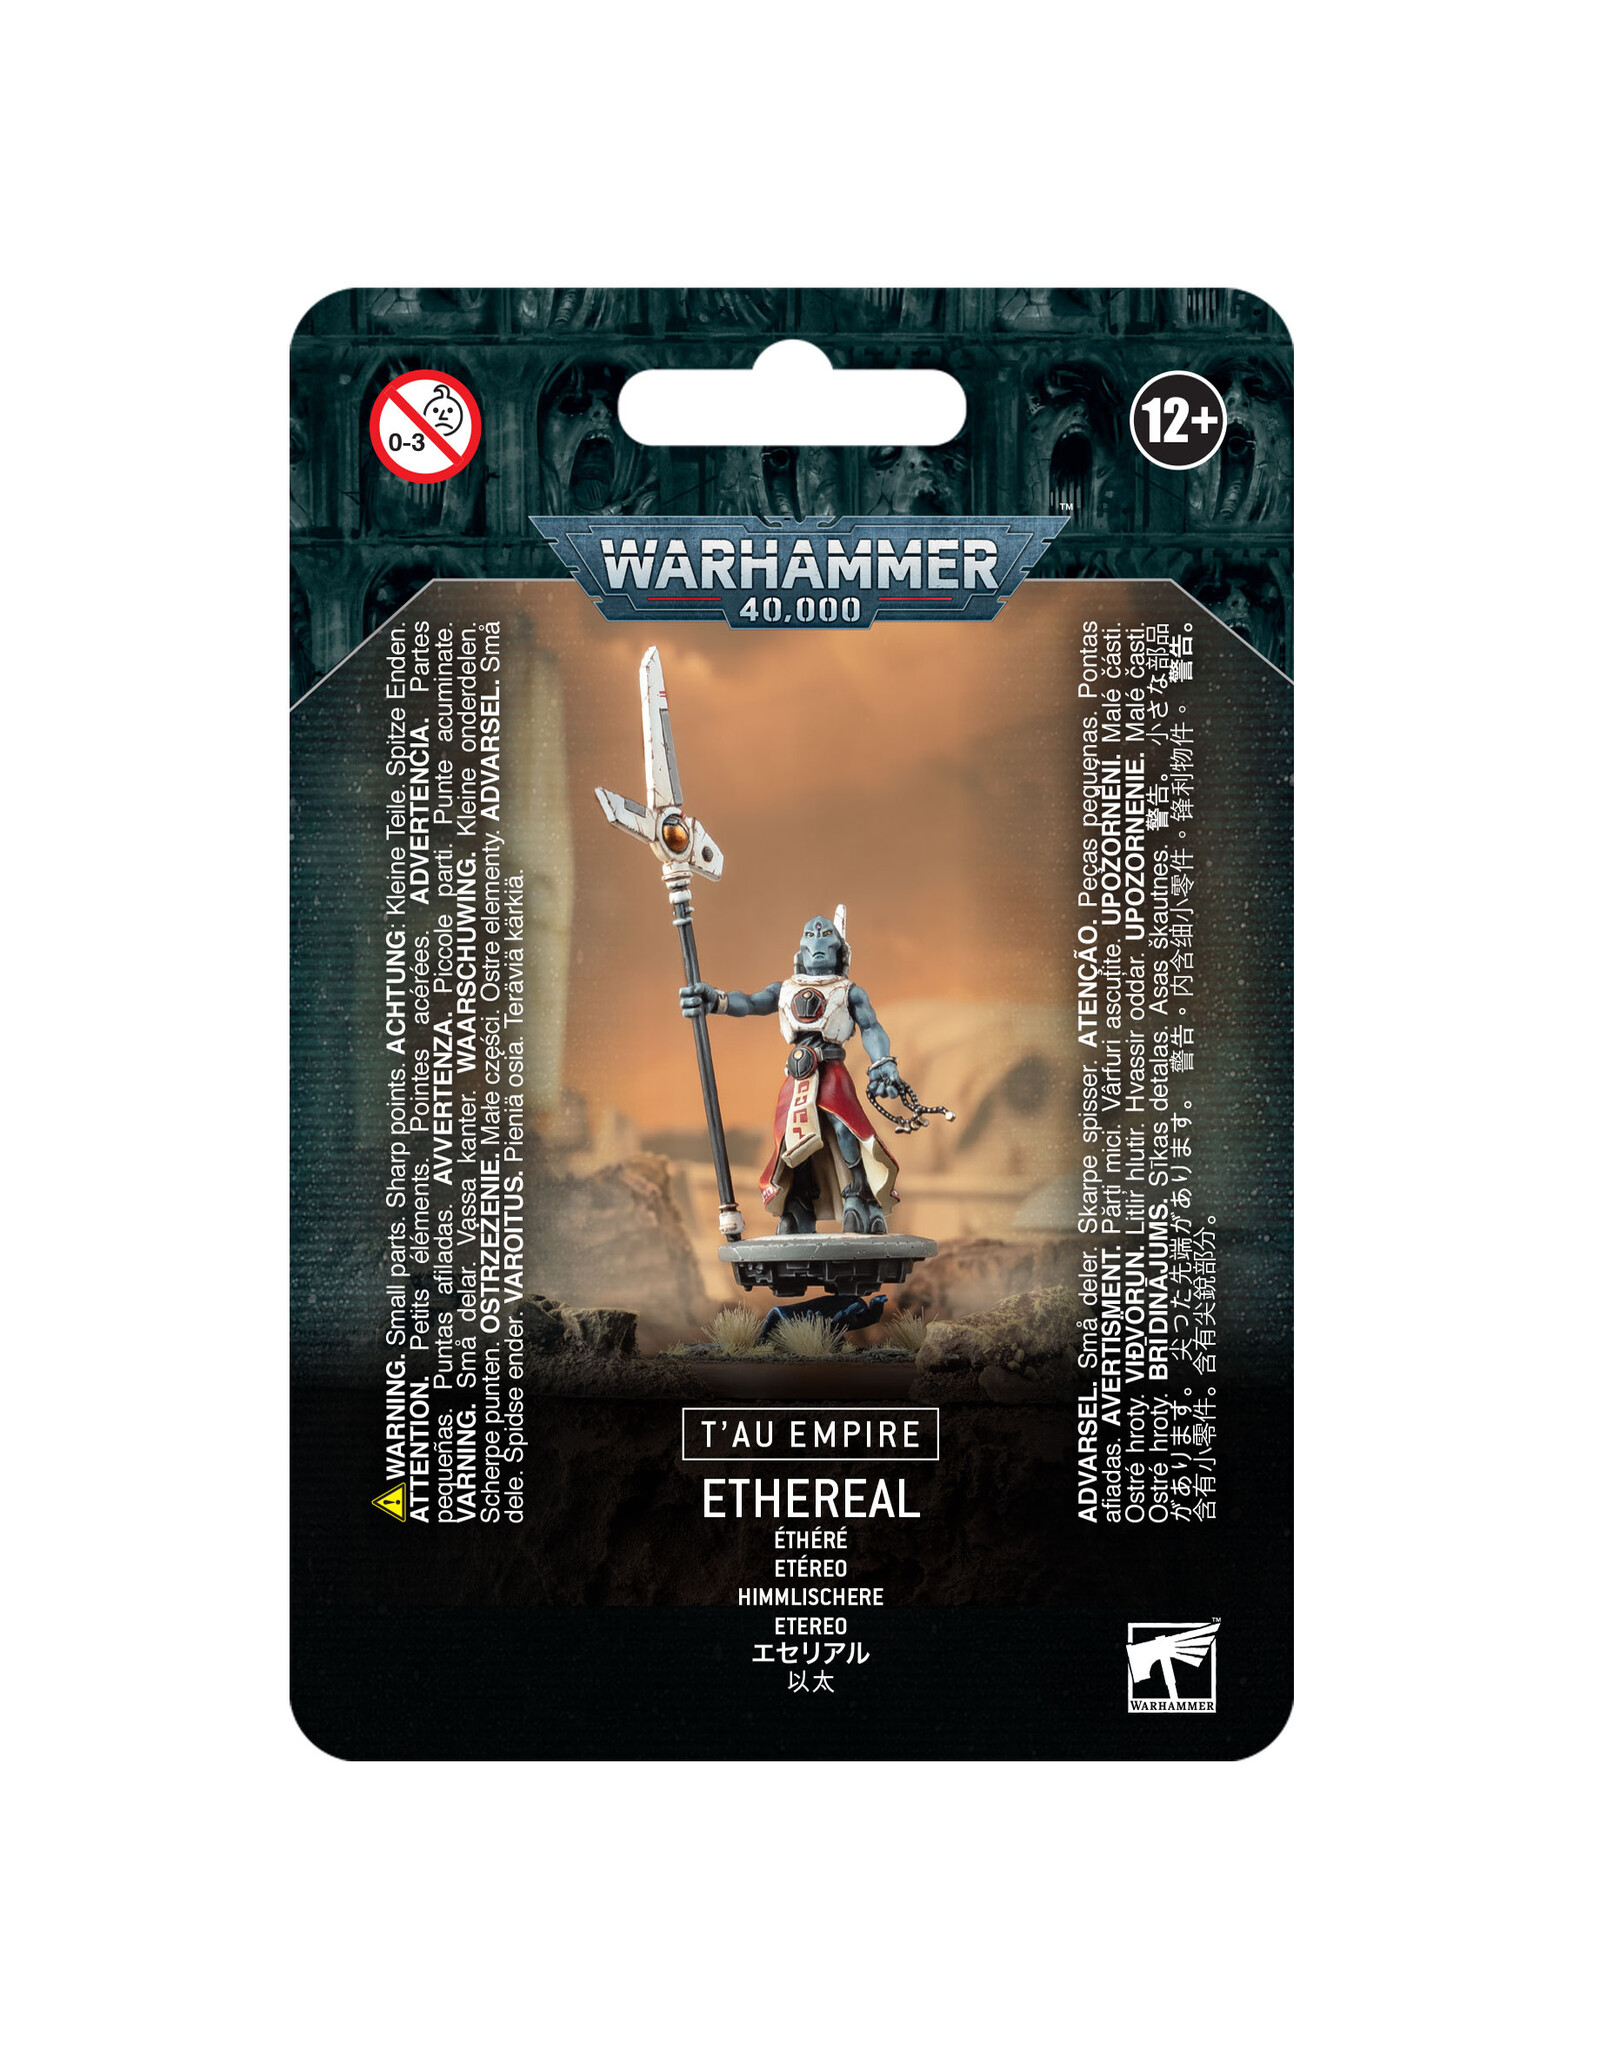 Warhammer 40K T'au Empire: Ethereal